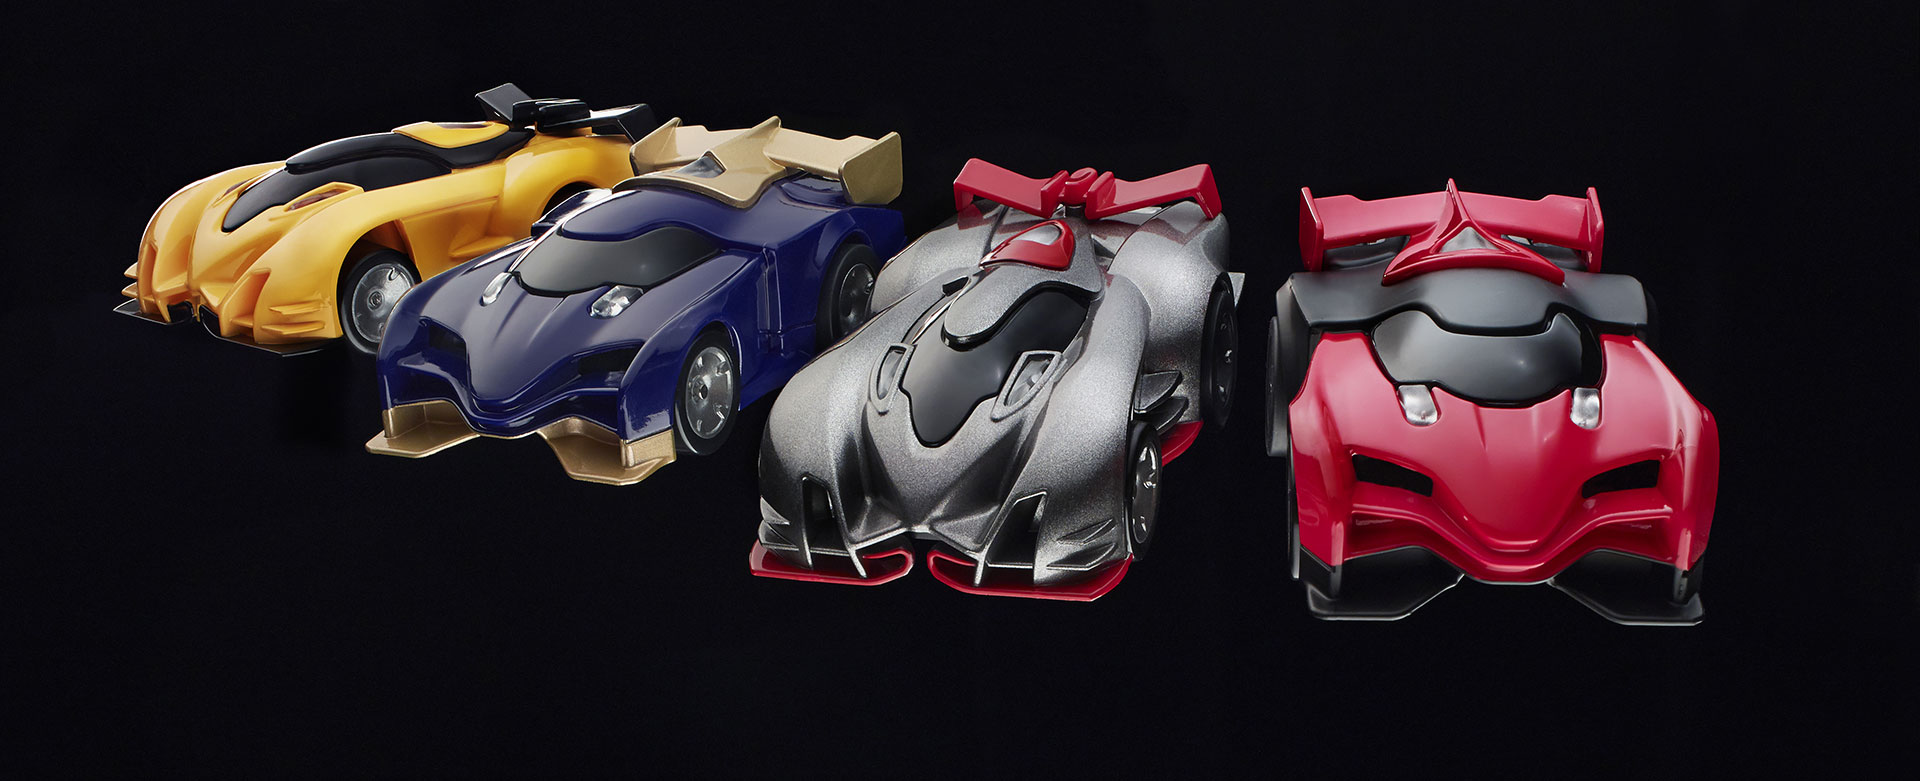 They Look Like Toy Cars, But They’re The ‘Future Of Consumer Robotics’